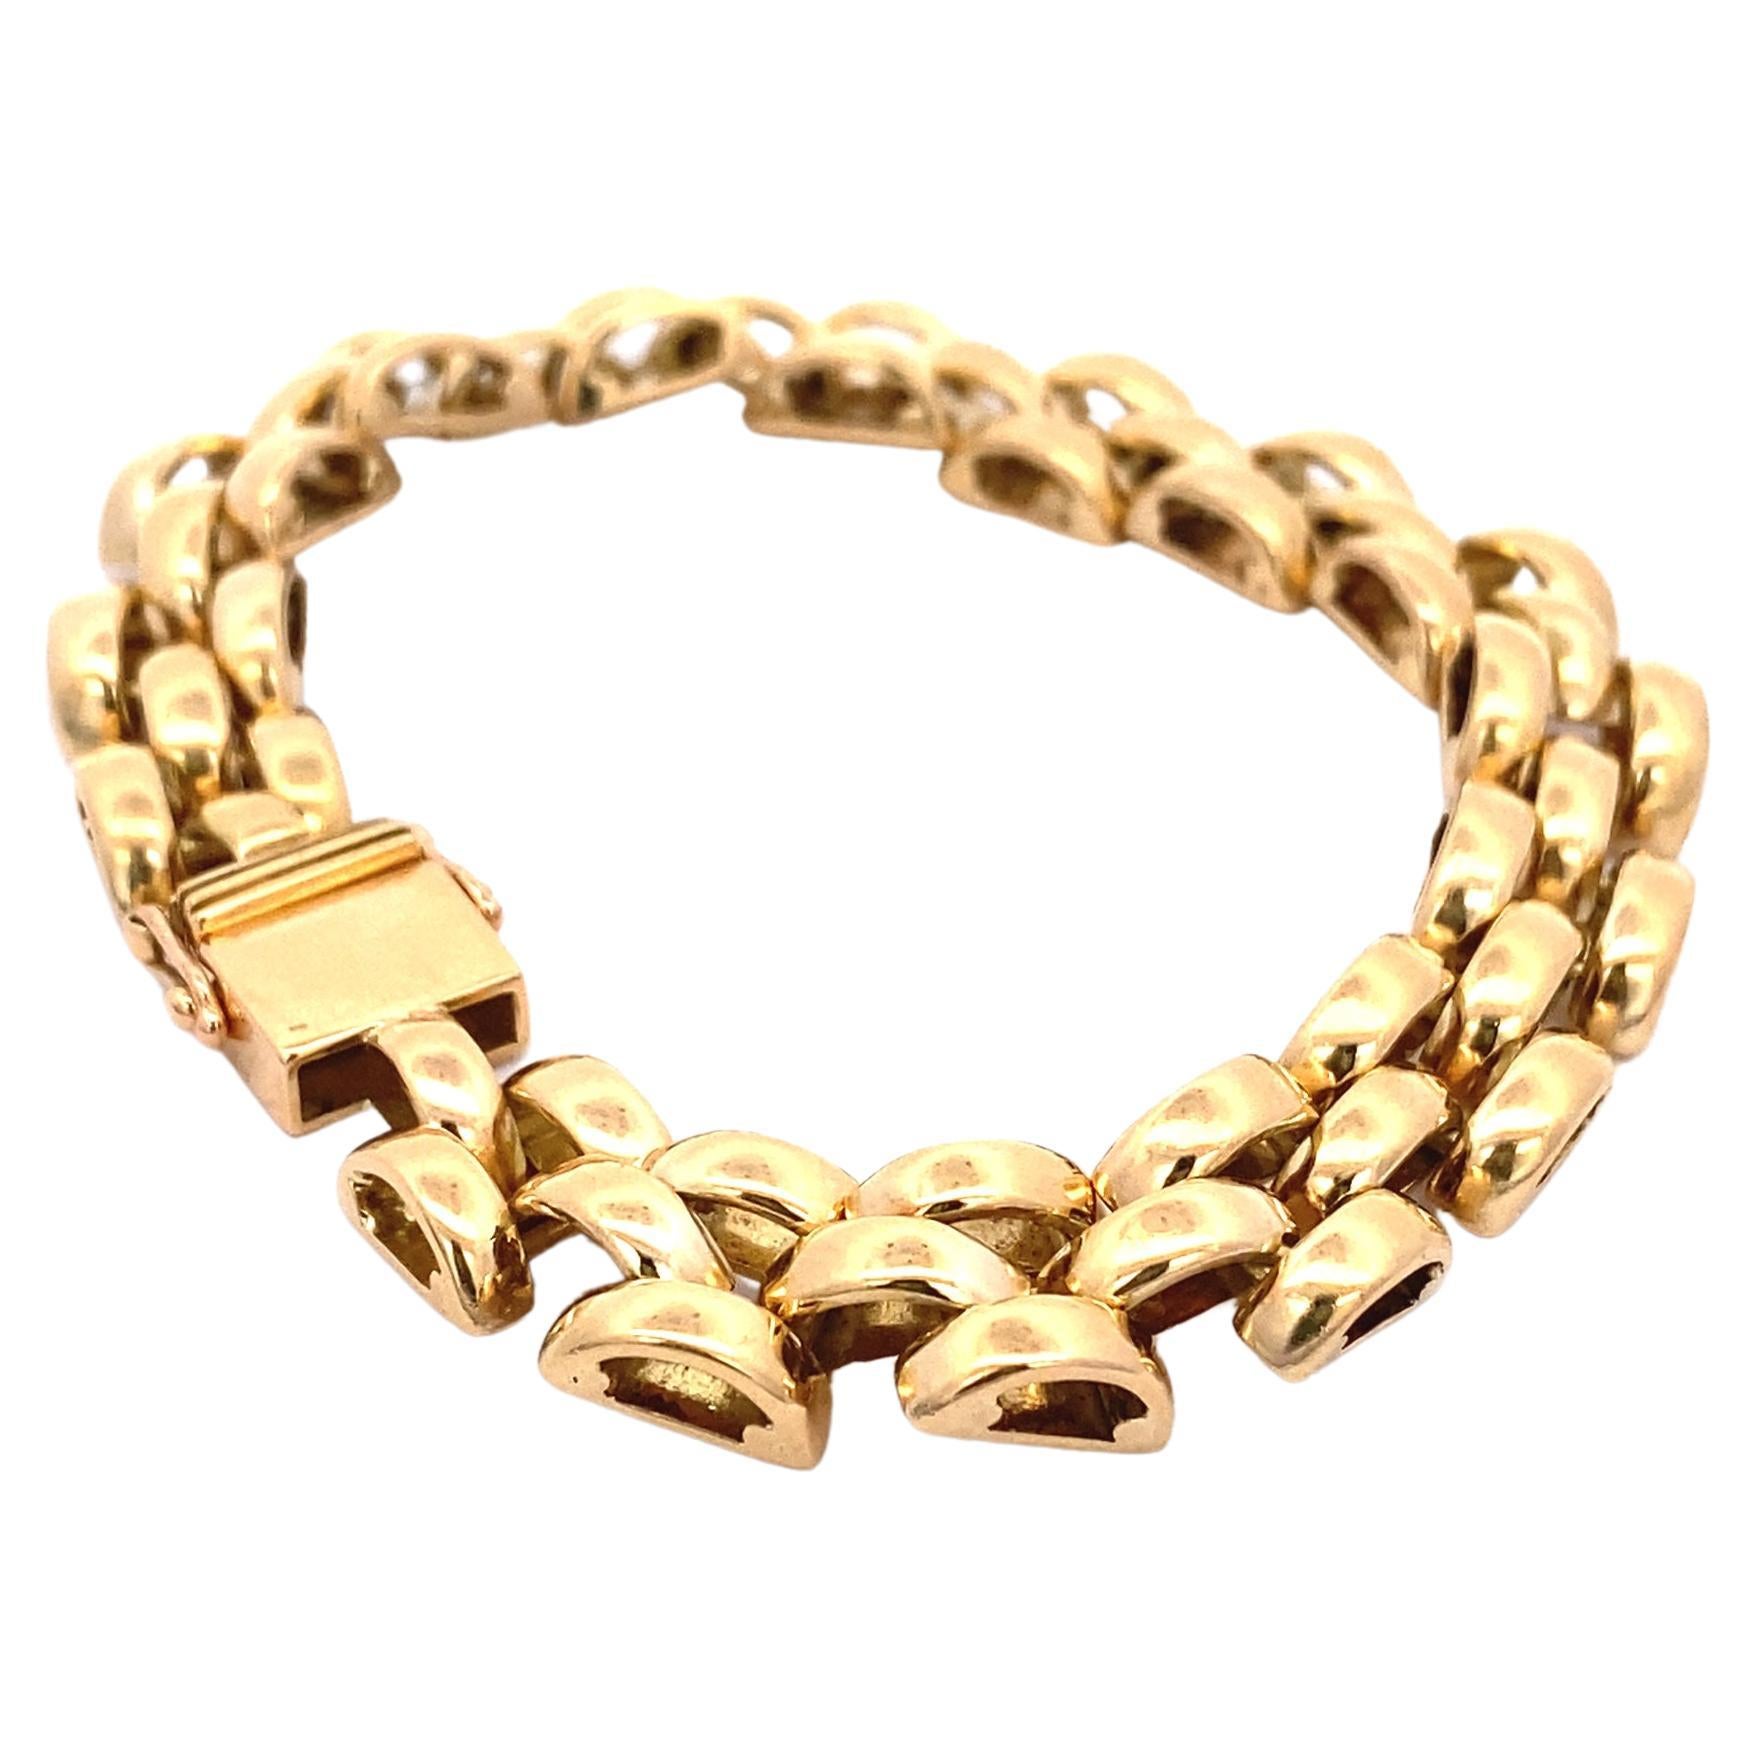 Estate 18k yellow gold woven link bracelet with box clasp and double safety-eights, 29.2Dwt,  7.25 inches long, 3/8th inches wide.